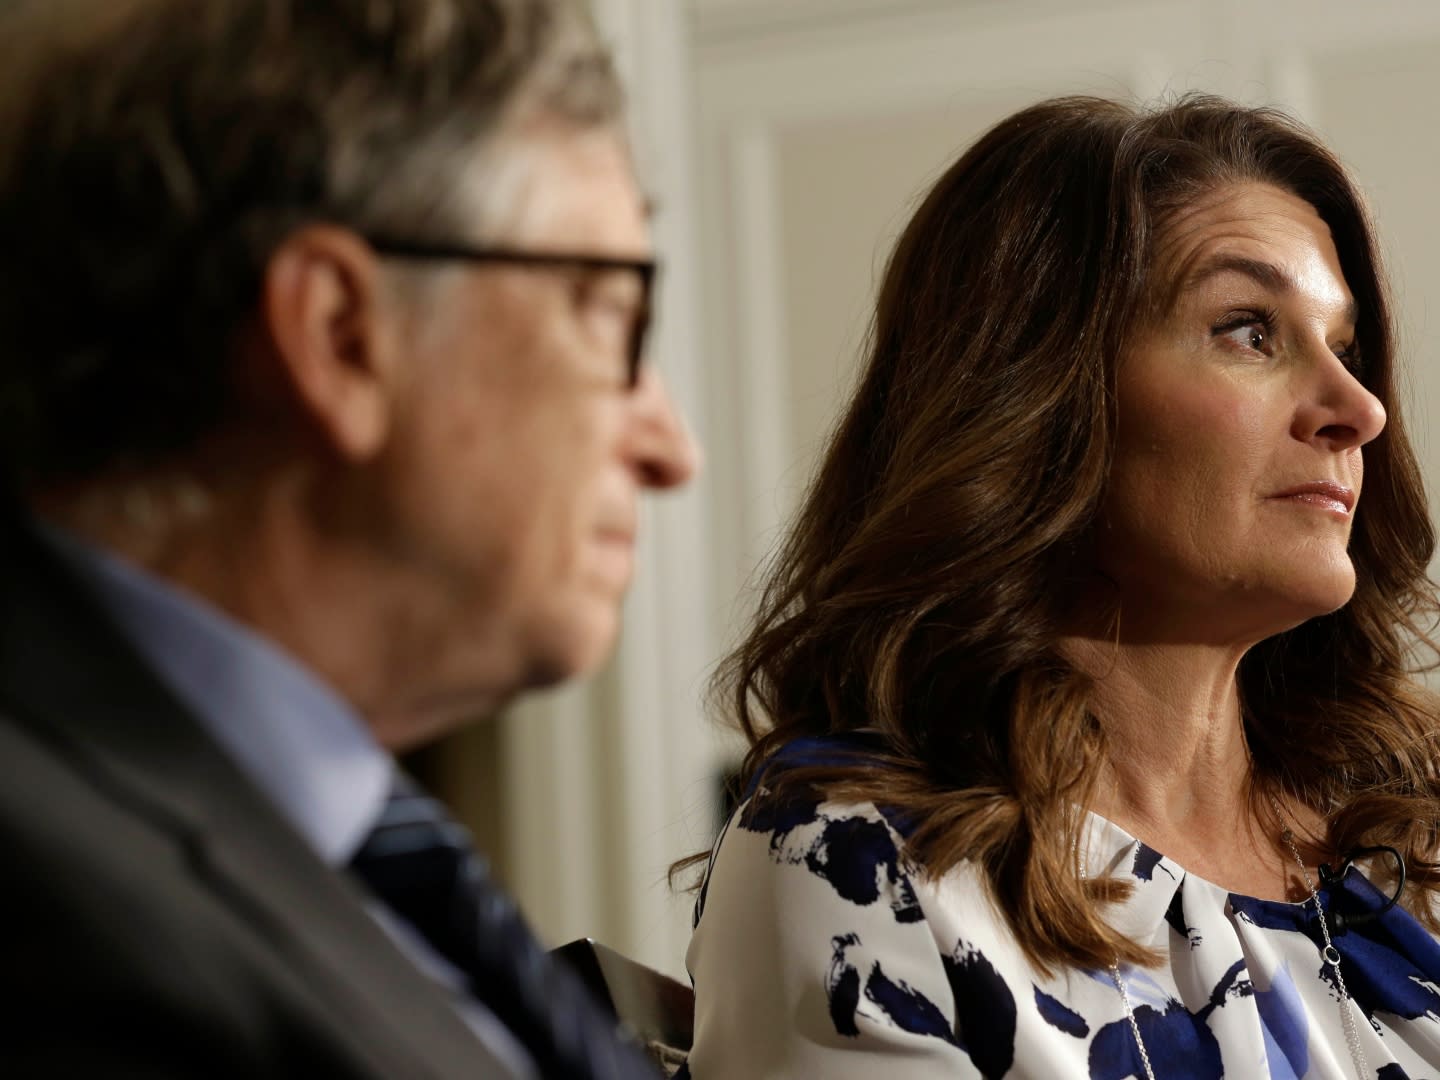 Bill gates dated hot girls Exclusive Melinda Gates Divorce Settlement Could Be Dependent On Her Silence About Bill Gates Jeffrey Epstein